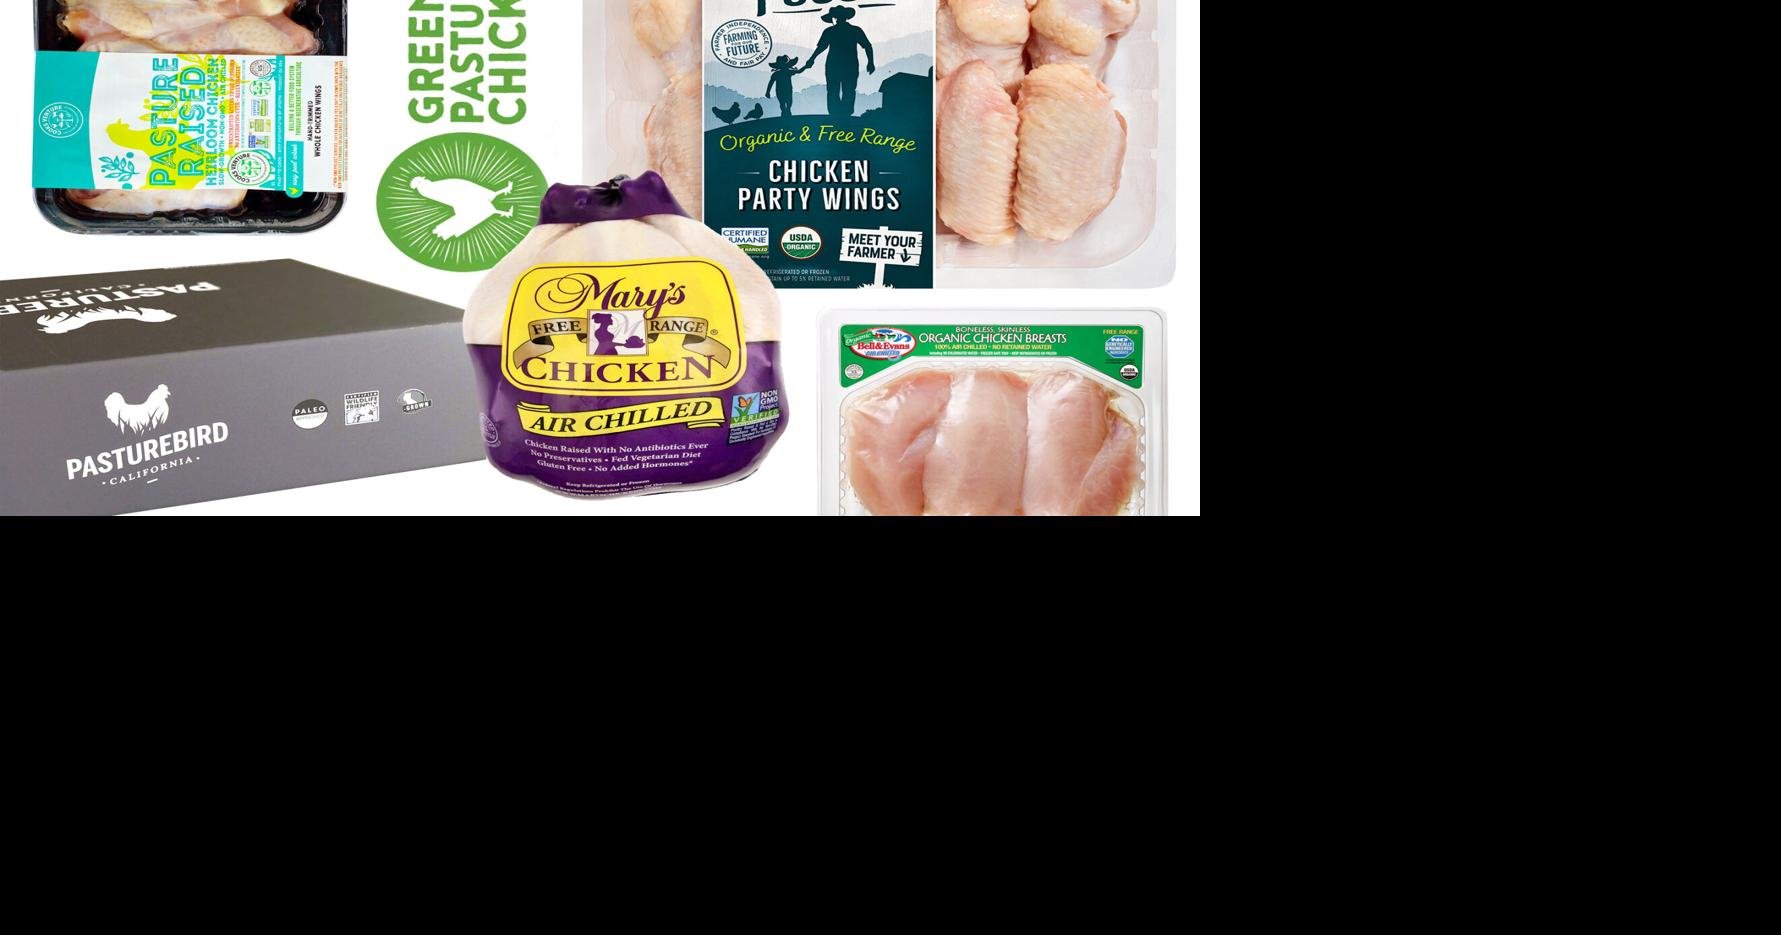 Save on Bell & Evans Air Chilled Premium Chicken Whole Organic Fresh Order  Online Delivery